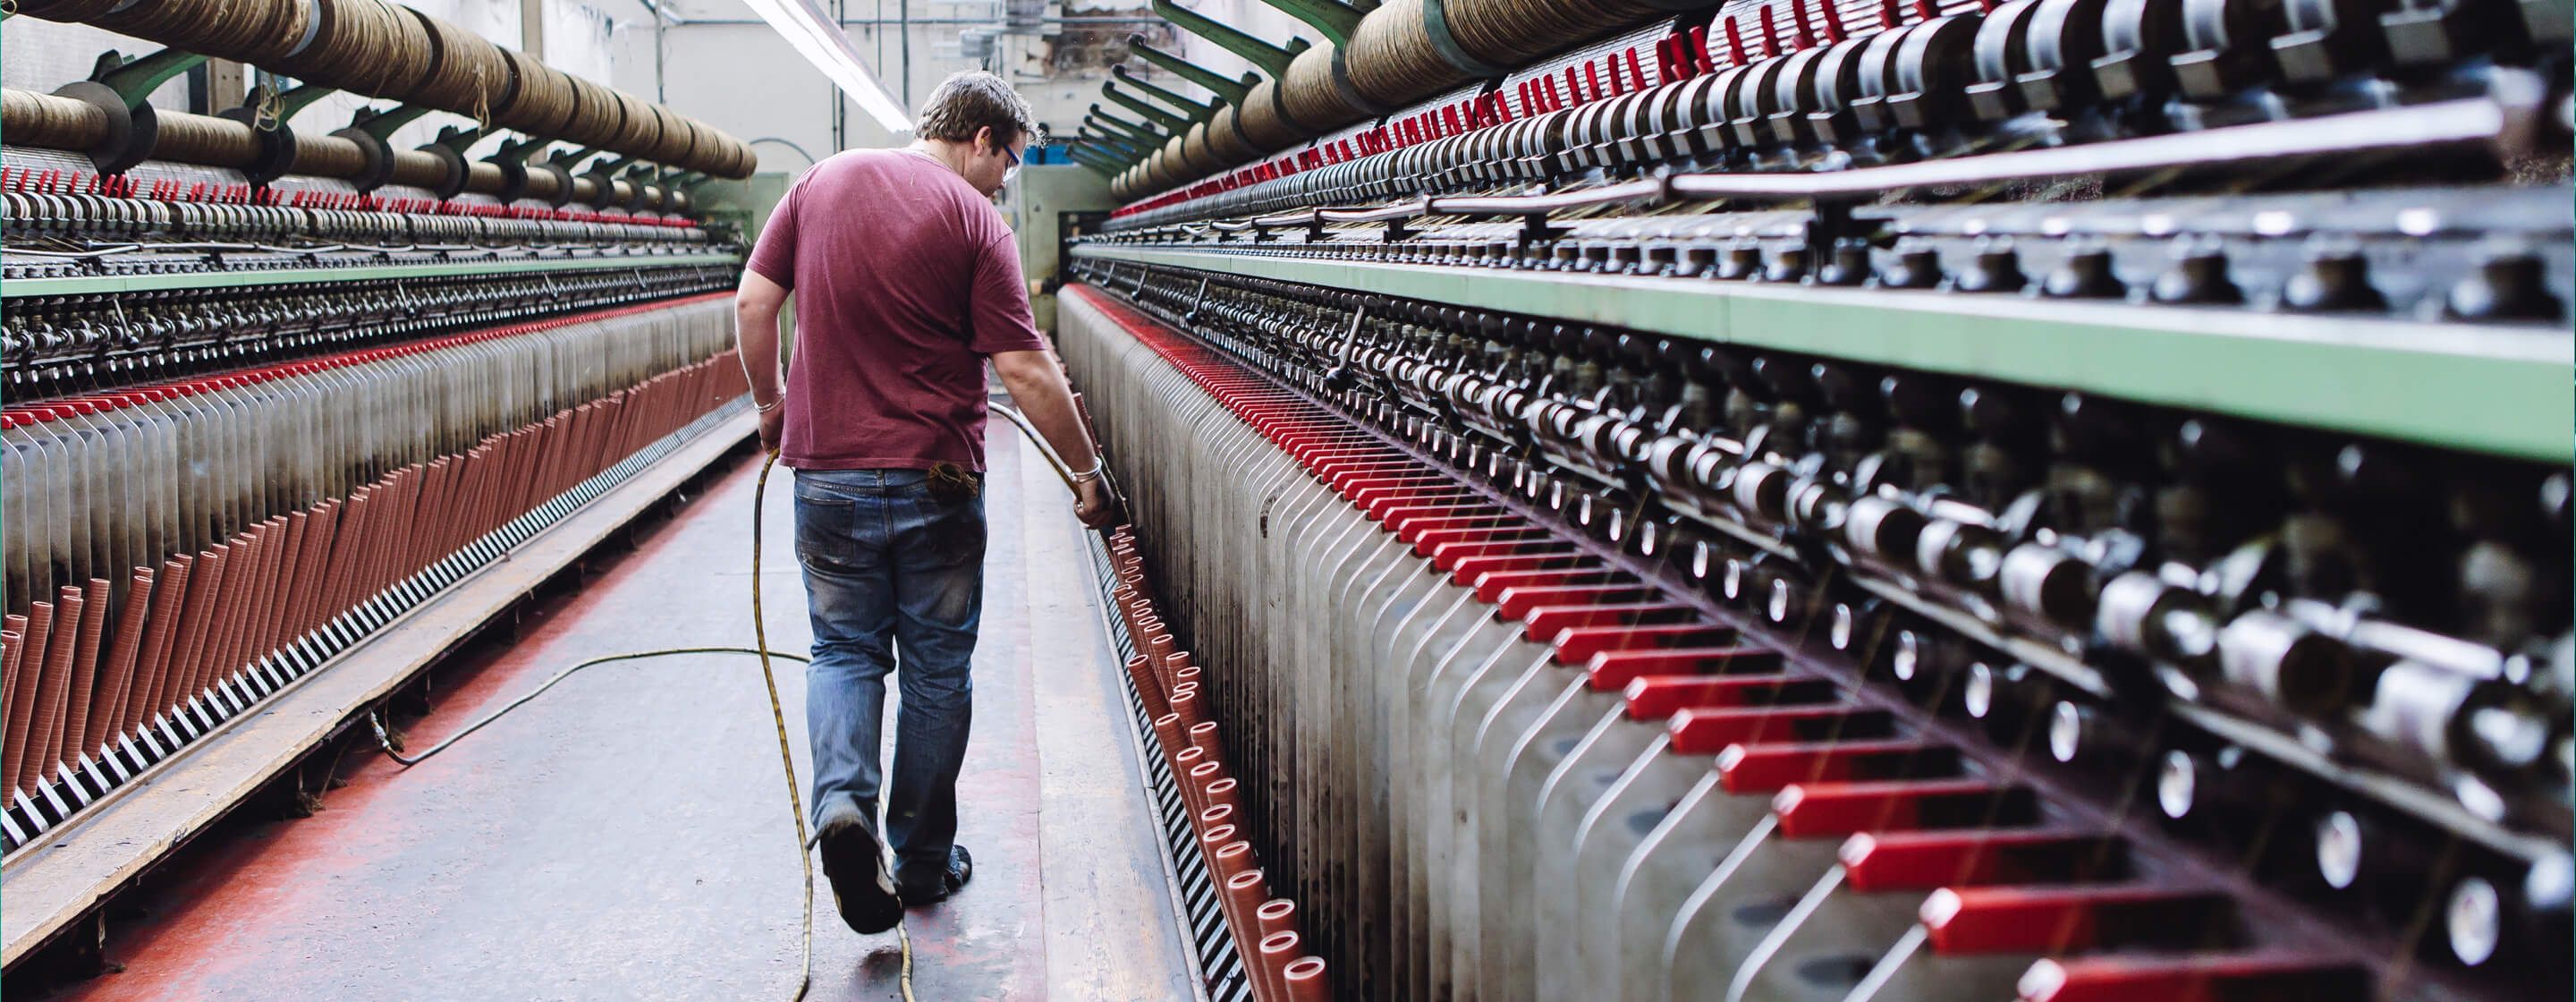 Man in t-shirt and jeans tending to large industrial textile looms in the textiles industry